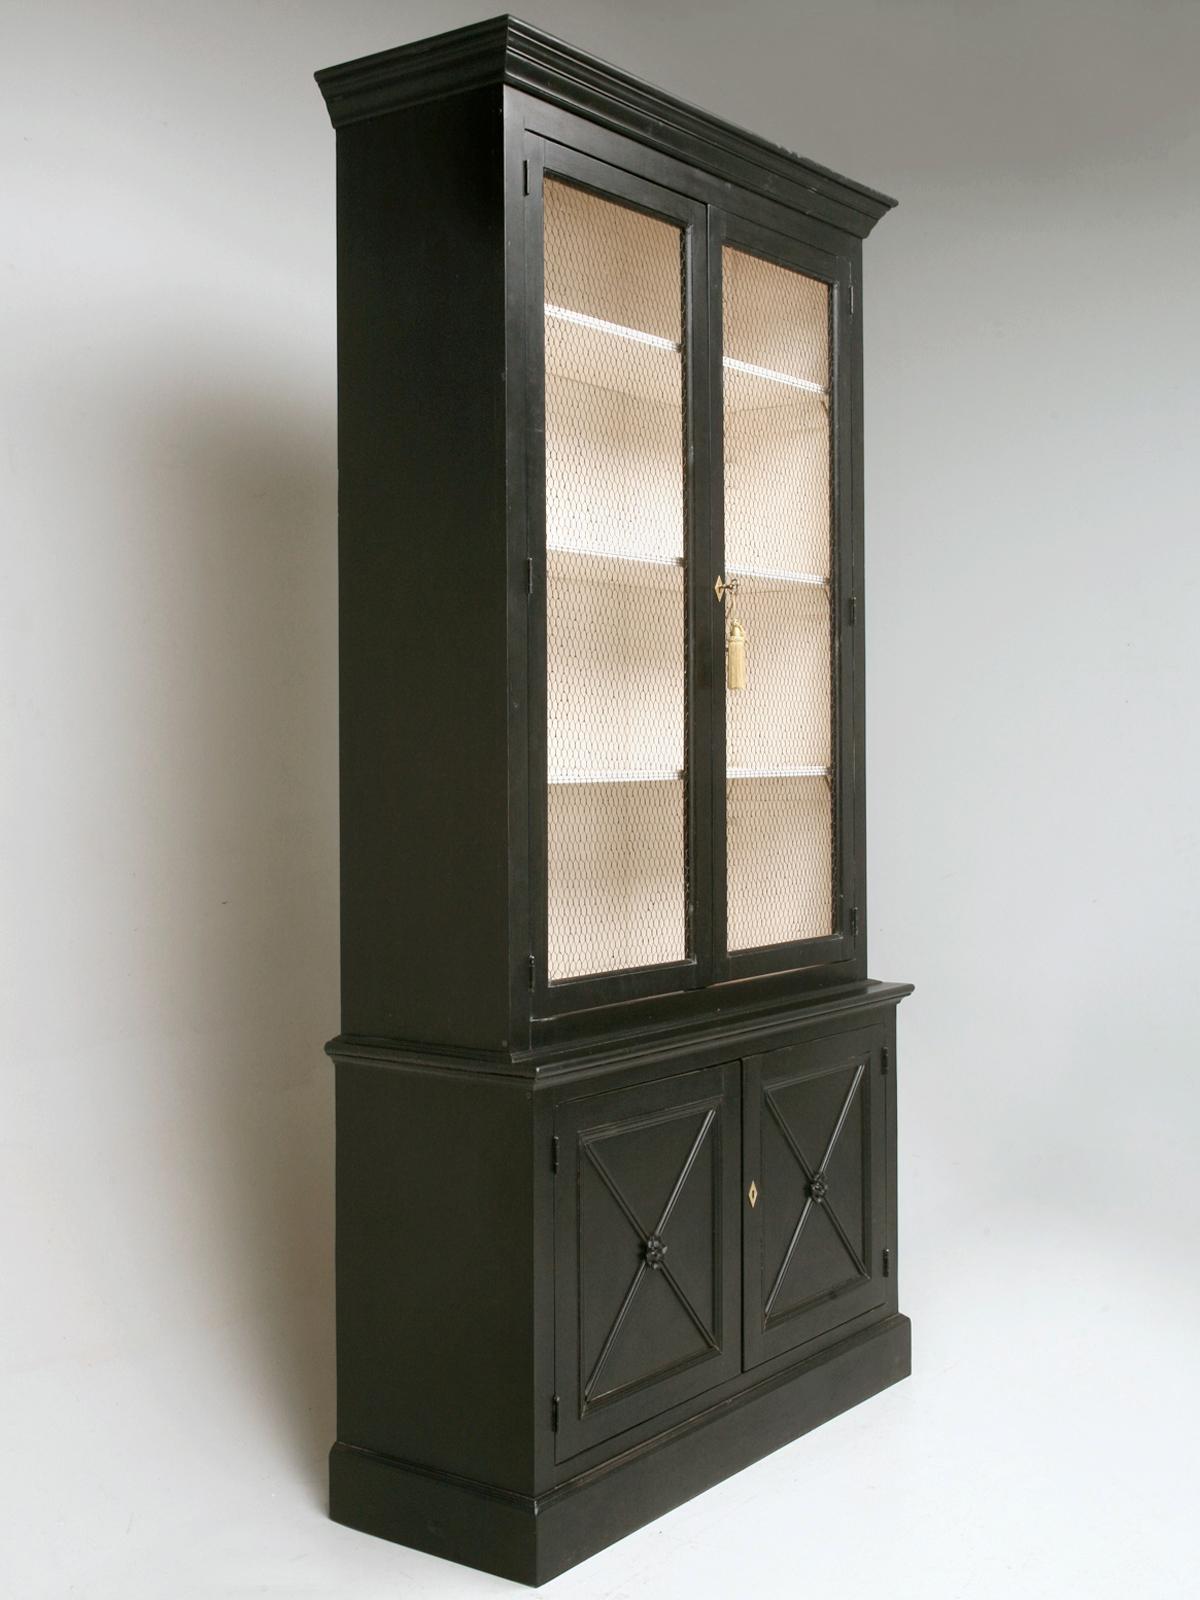 Custom Country French inspired handmade 4-door bookcase, in the Directoire style, finished with a black brushed painted exterior, French vanilla interior and European style chicken wire in the upper doors. Crafted by hand here in our own Chicago